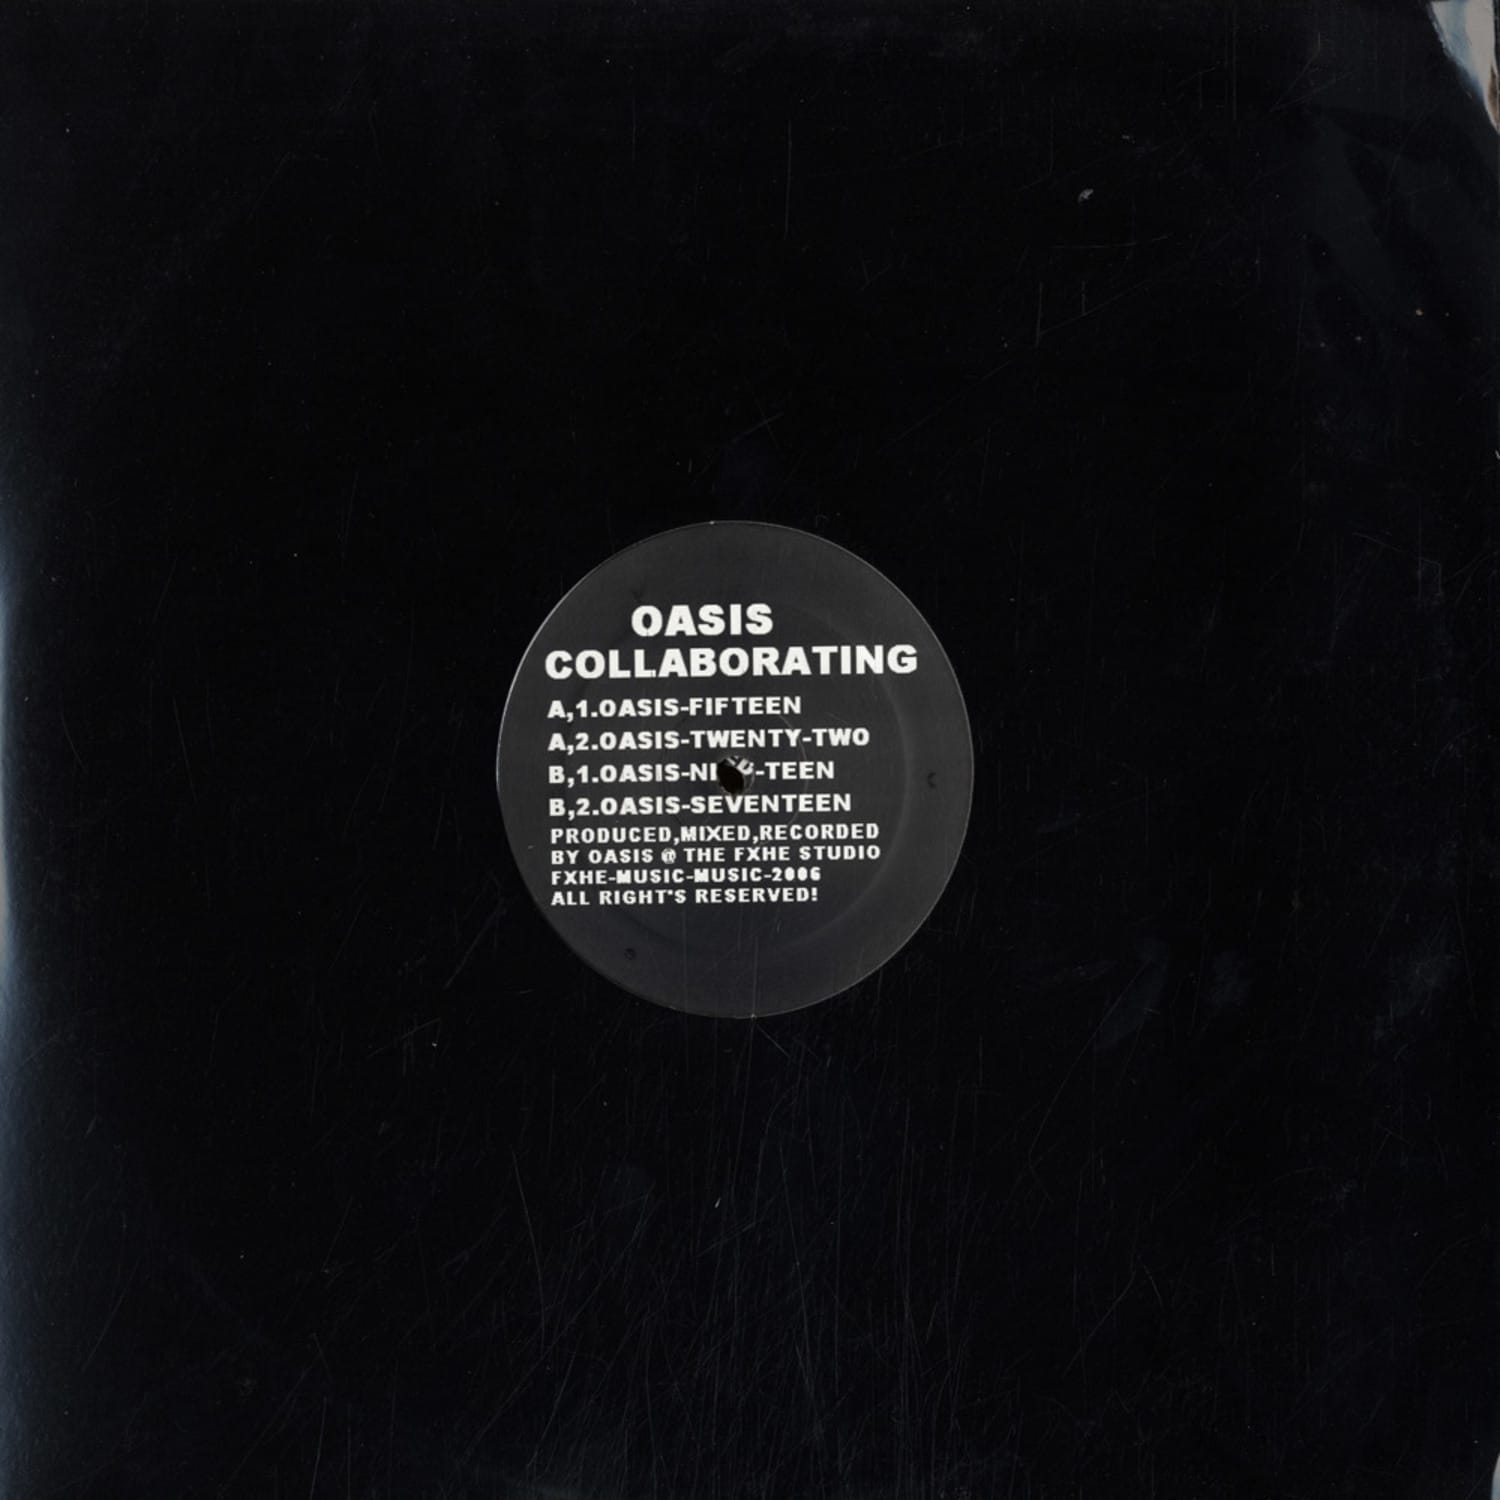 Omar S - OASIS COLLABORATING 2 